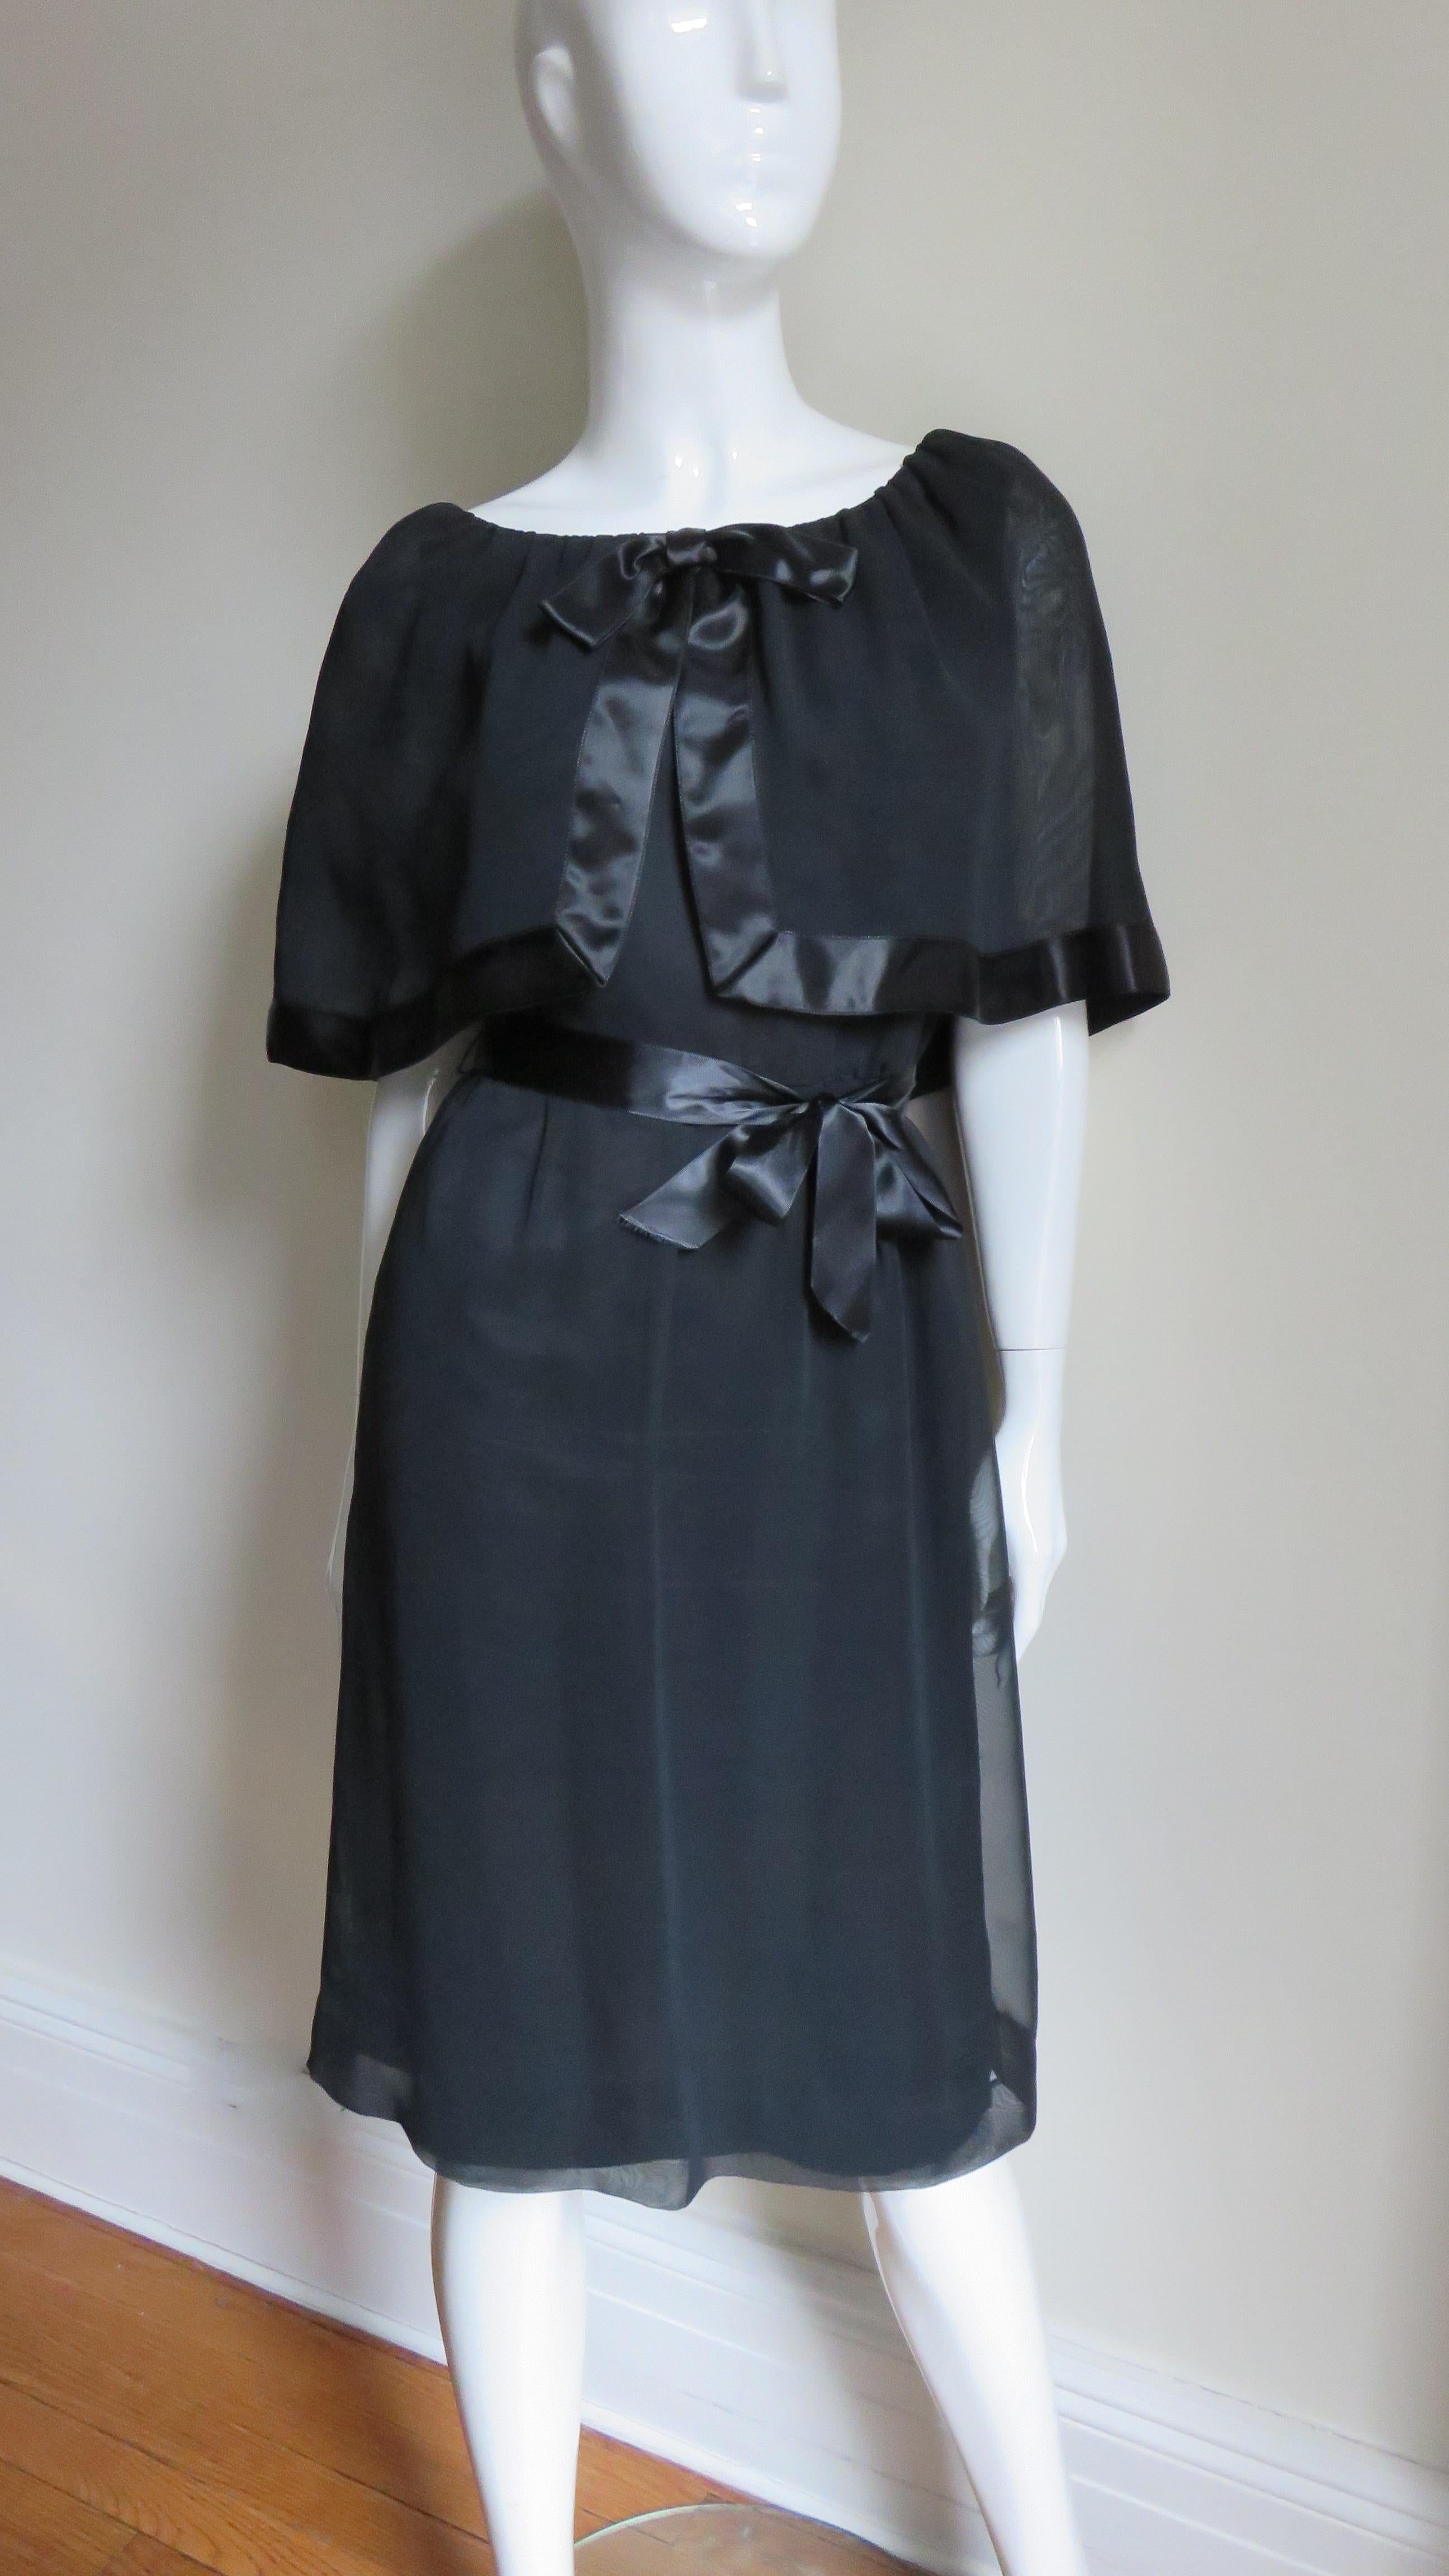 A fabulous black silk dress by William Travilla.  It has a rounded neckline with an attached gathered elbow length caplet edged in black silk satin.  It has a gathered subtle A line skirt, back zipper and a matching black satin tie belt at the